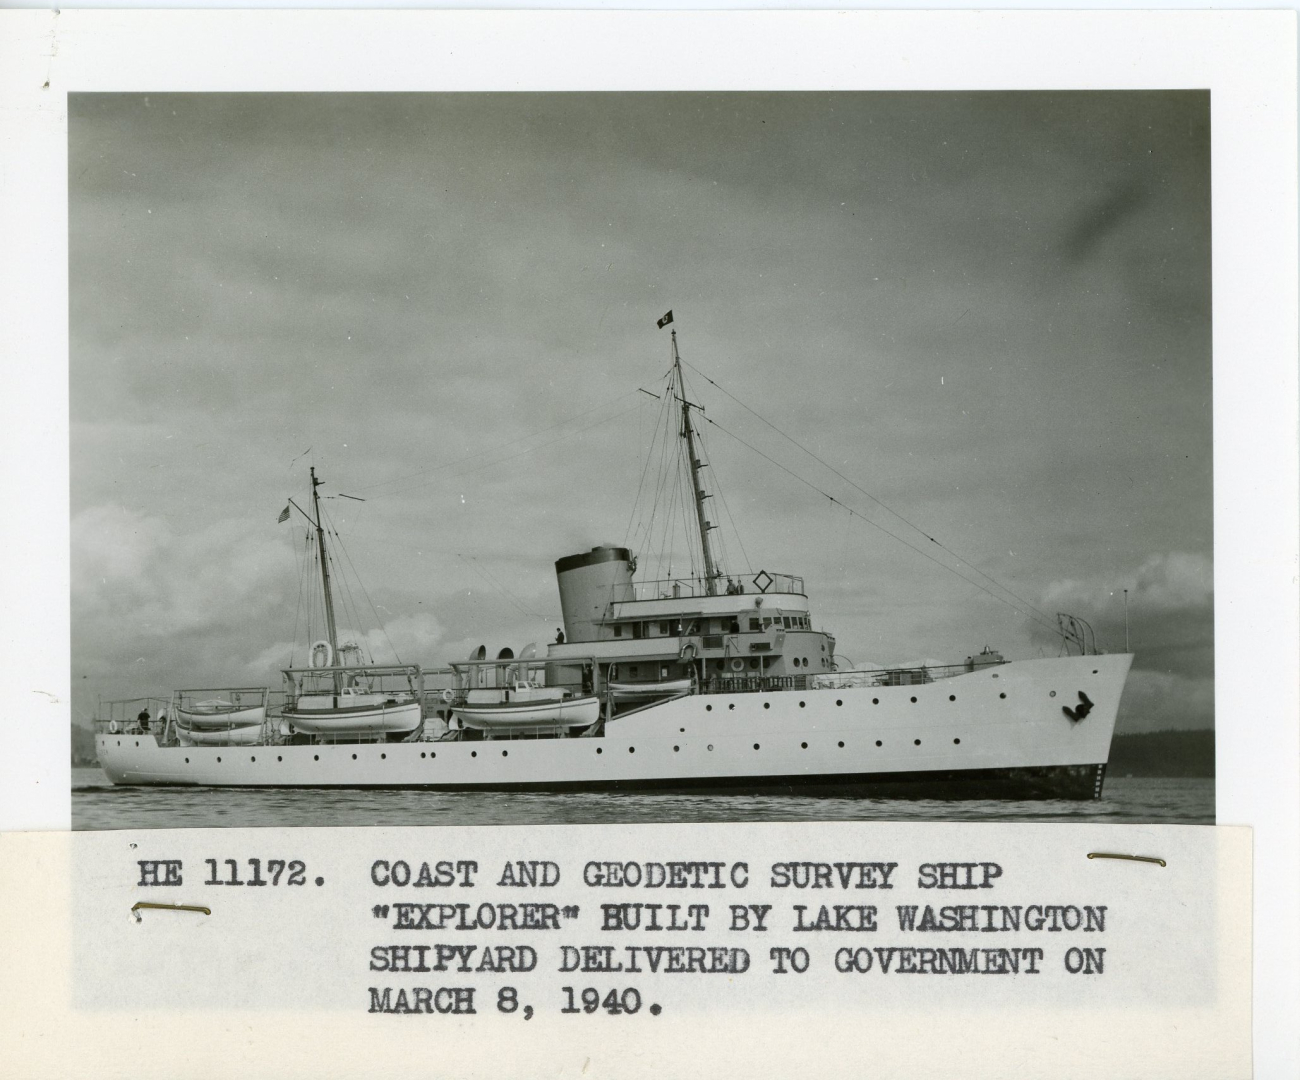 The new USC&GS; Ship EXPLORER after completion and acceptance bygovernment